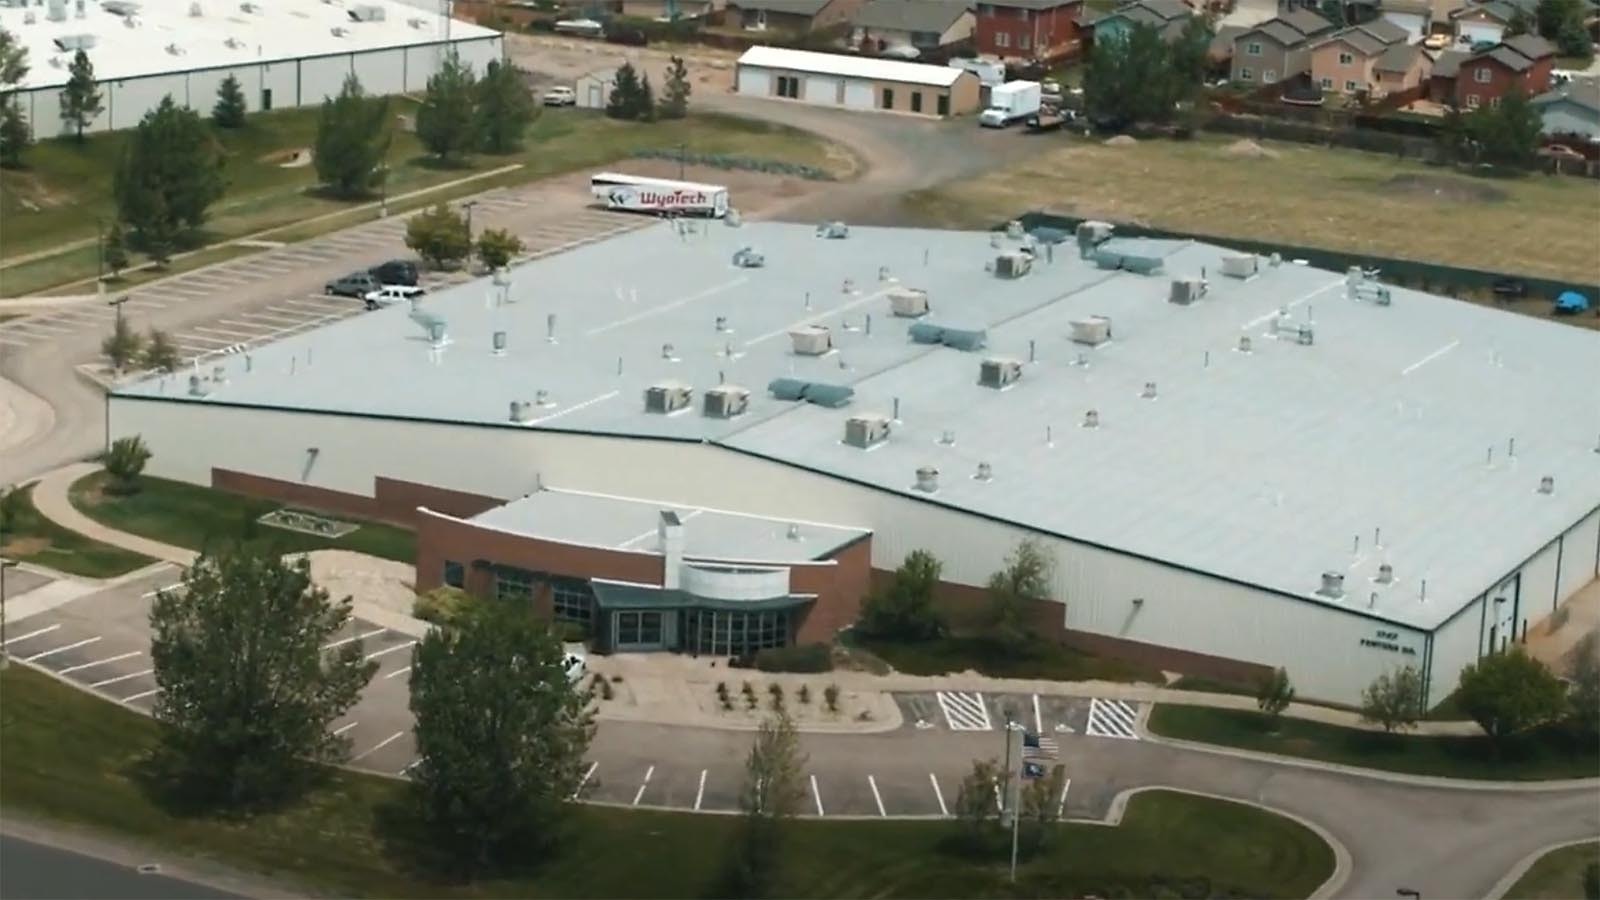 The WyoTech campus in Laramie, Wyoming, has expanded and upgraded significantly over the last decade.